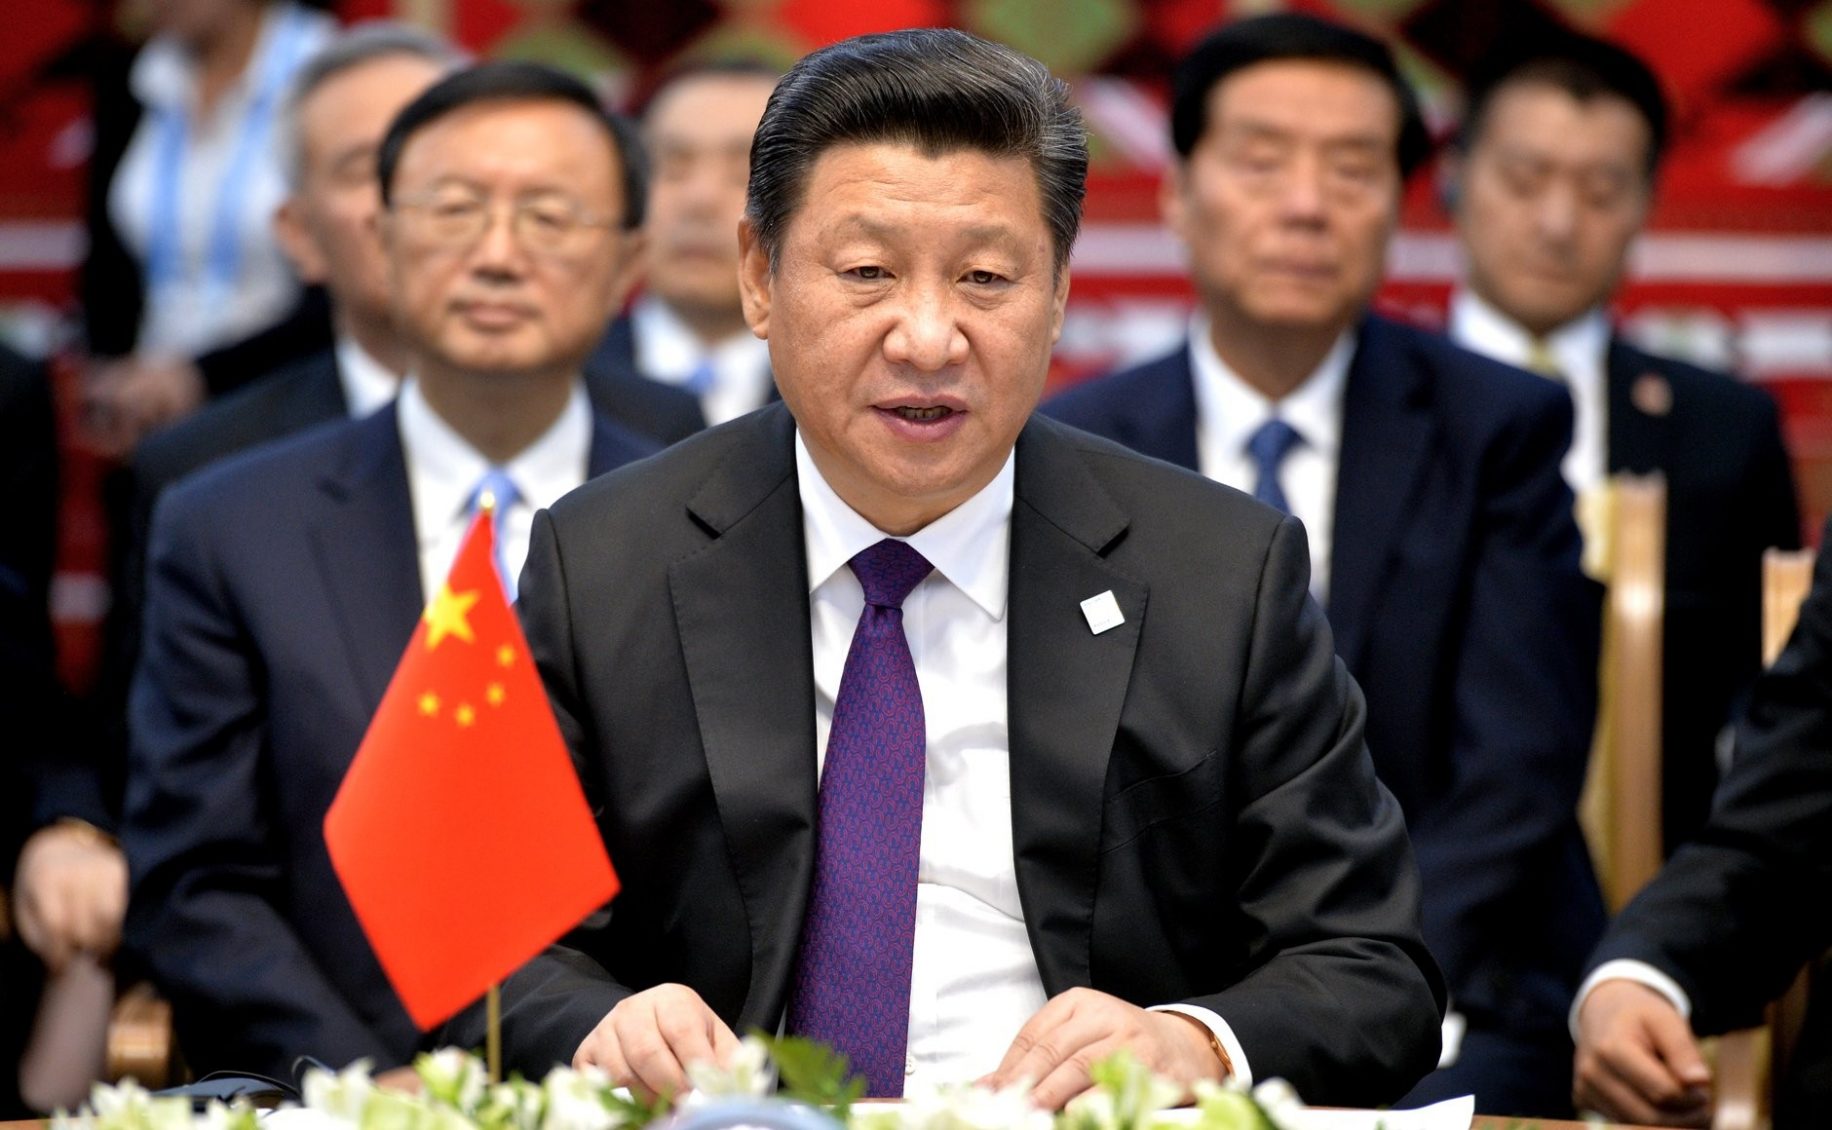 Fears grow for Chinese student who's now missing after telling Xi Jinping to step down